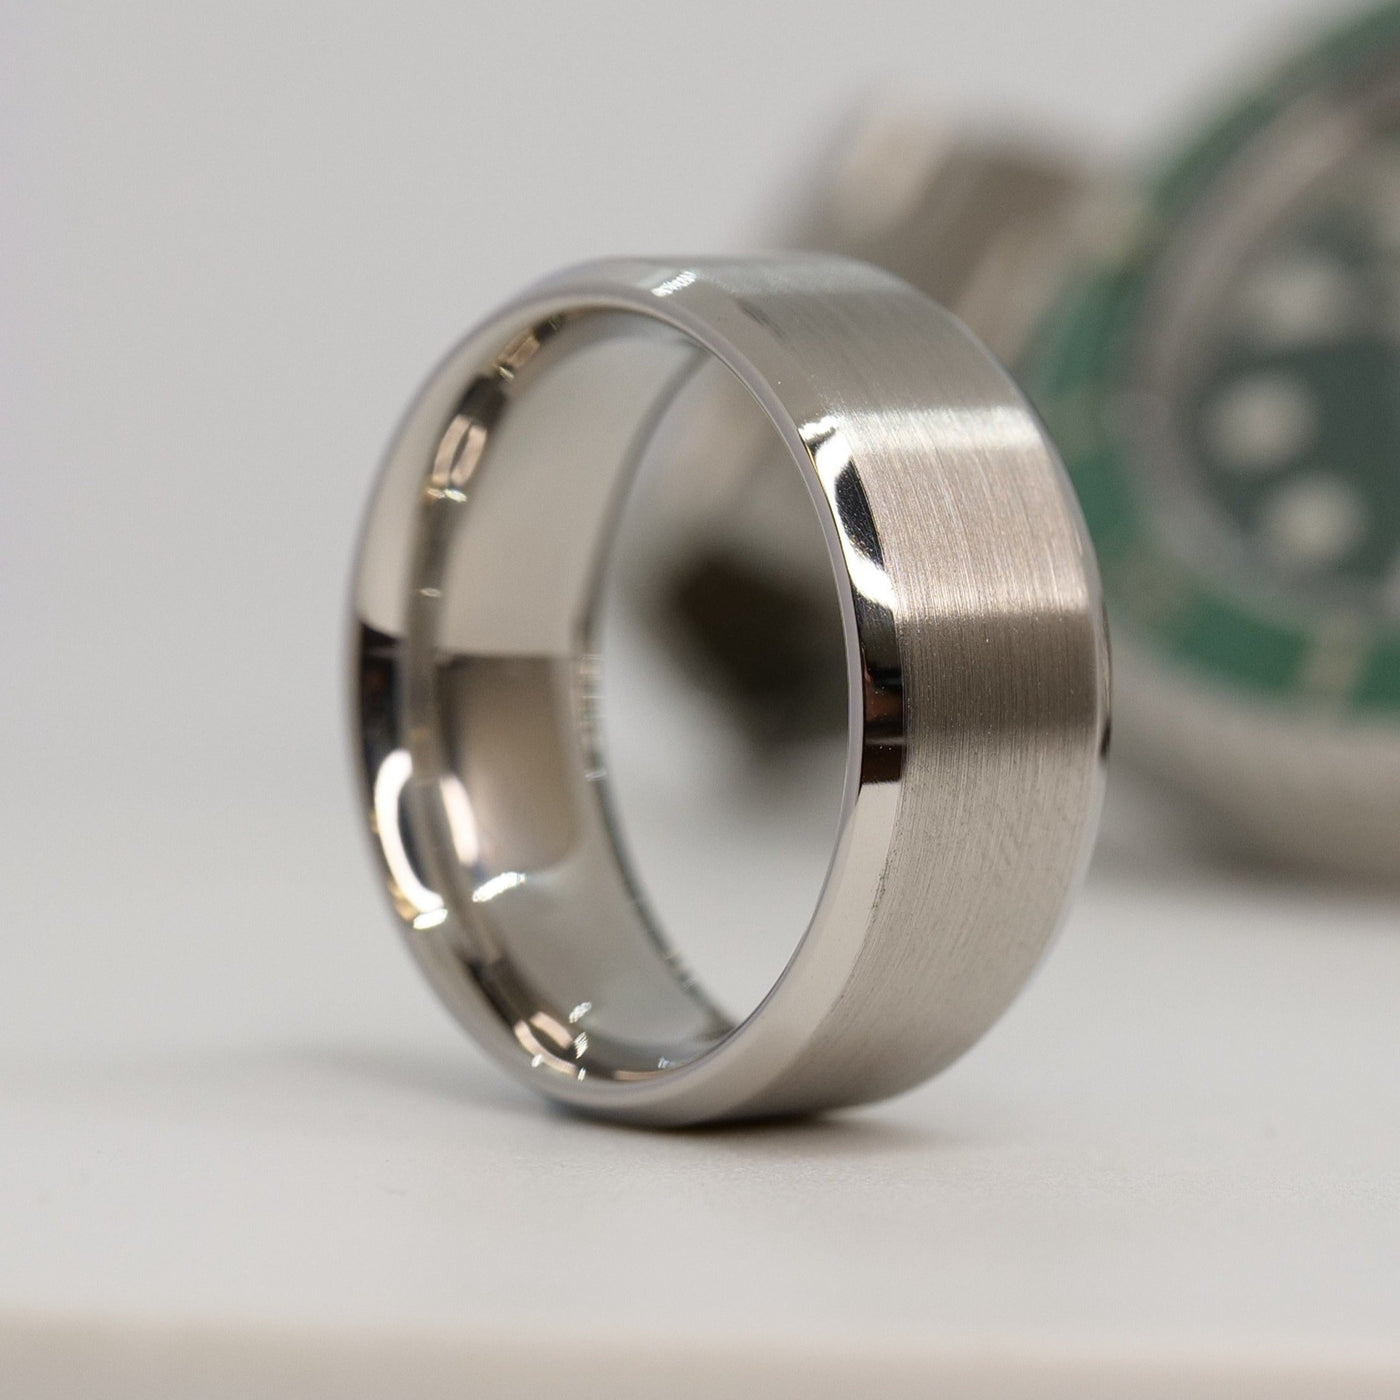 8mm Beveled 904L Stainless Steel Ring | Handcrafted in The USA